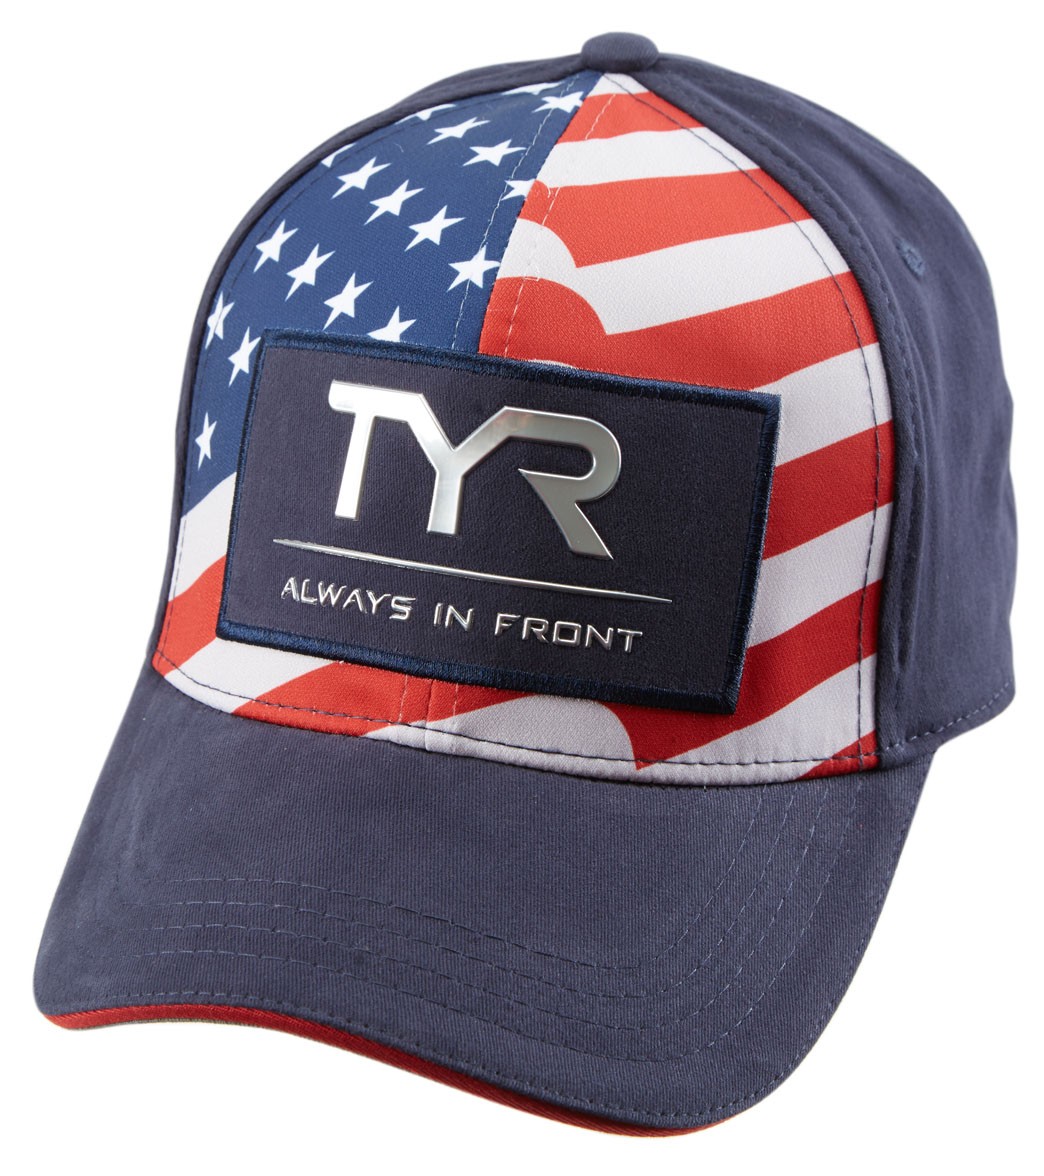 TYR Always In Front Glory Fitted Cap - Red/White/Blue Small/Medium Cotton/Polyester - Swimoutlet.com